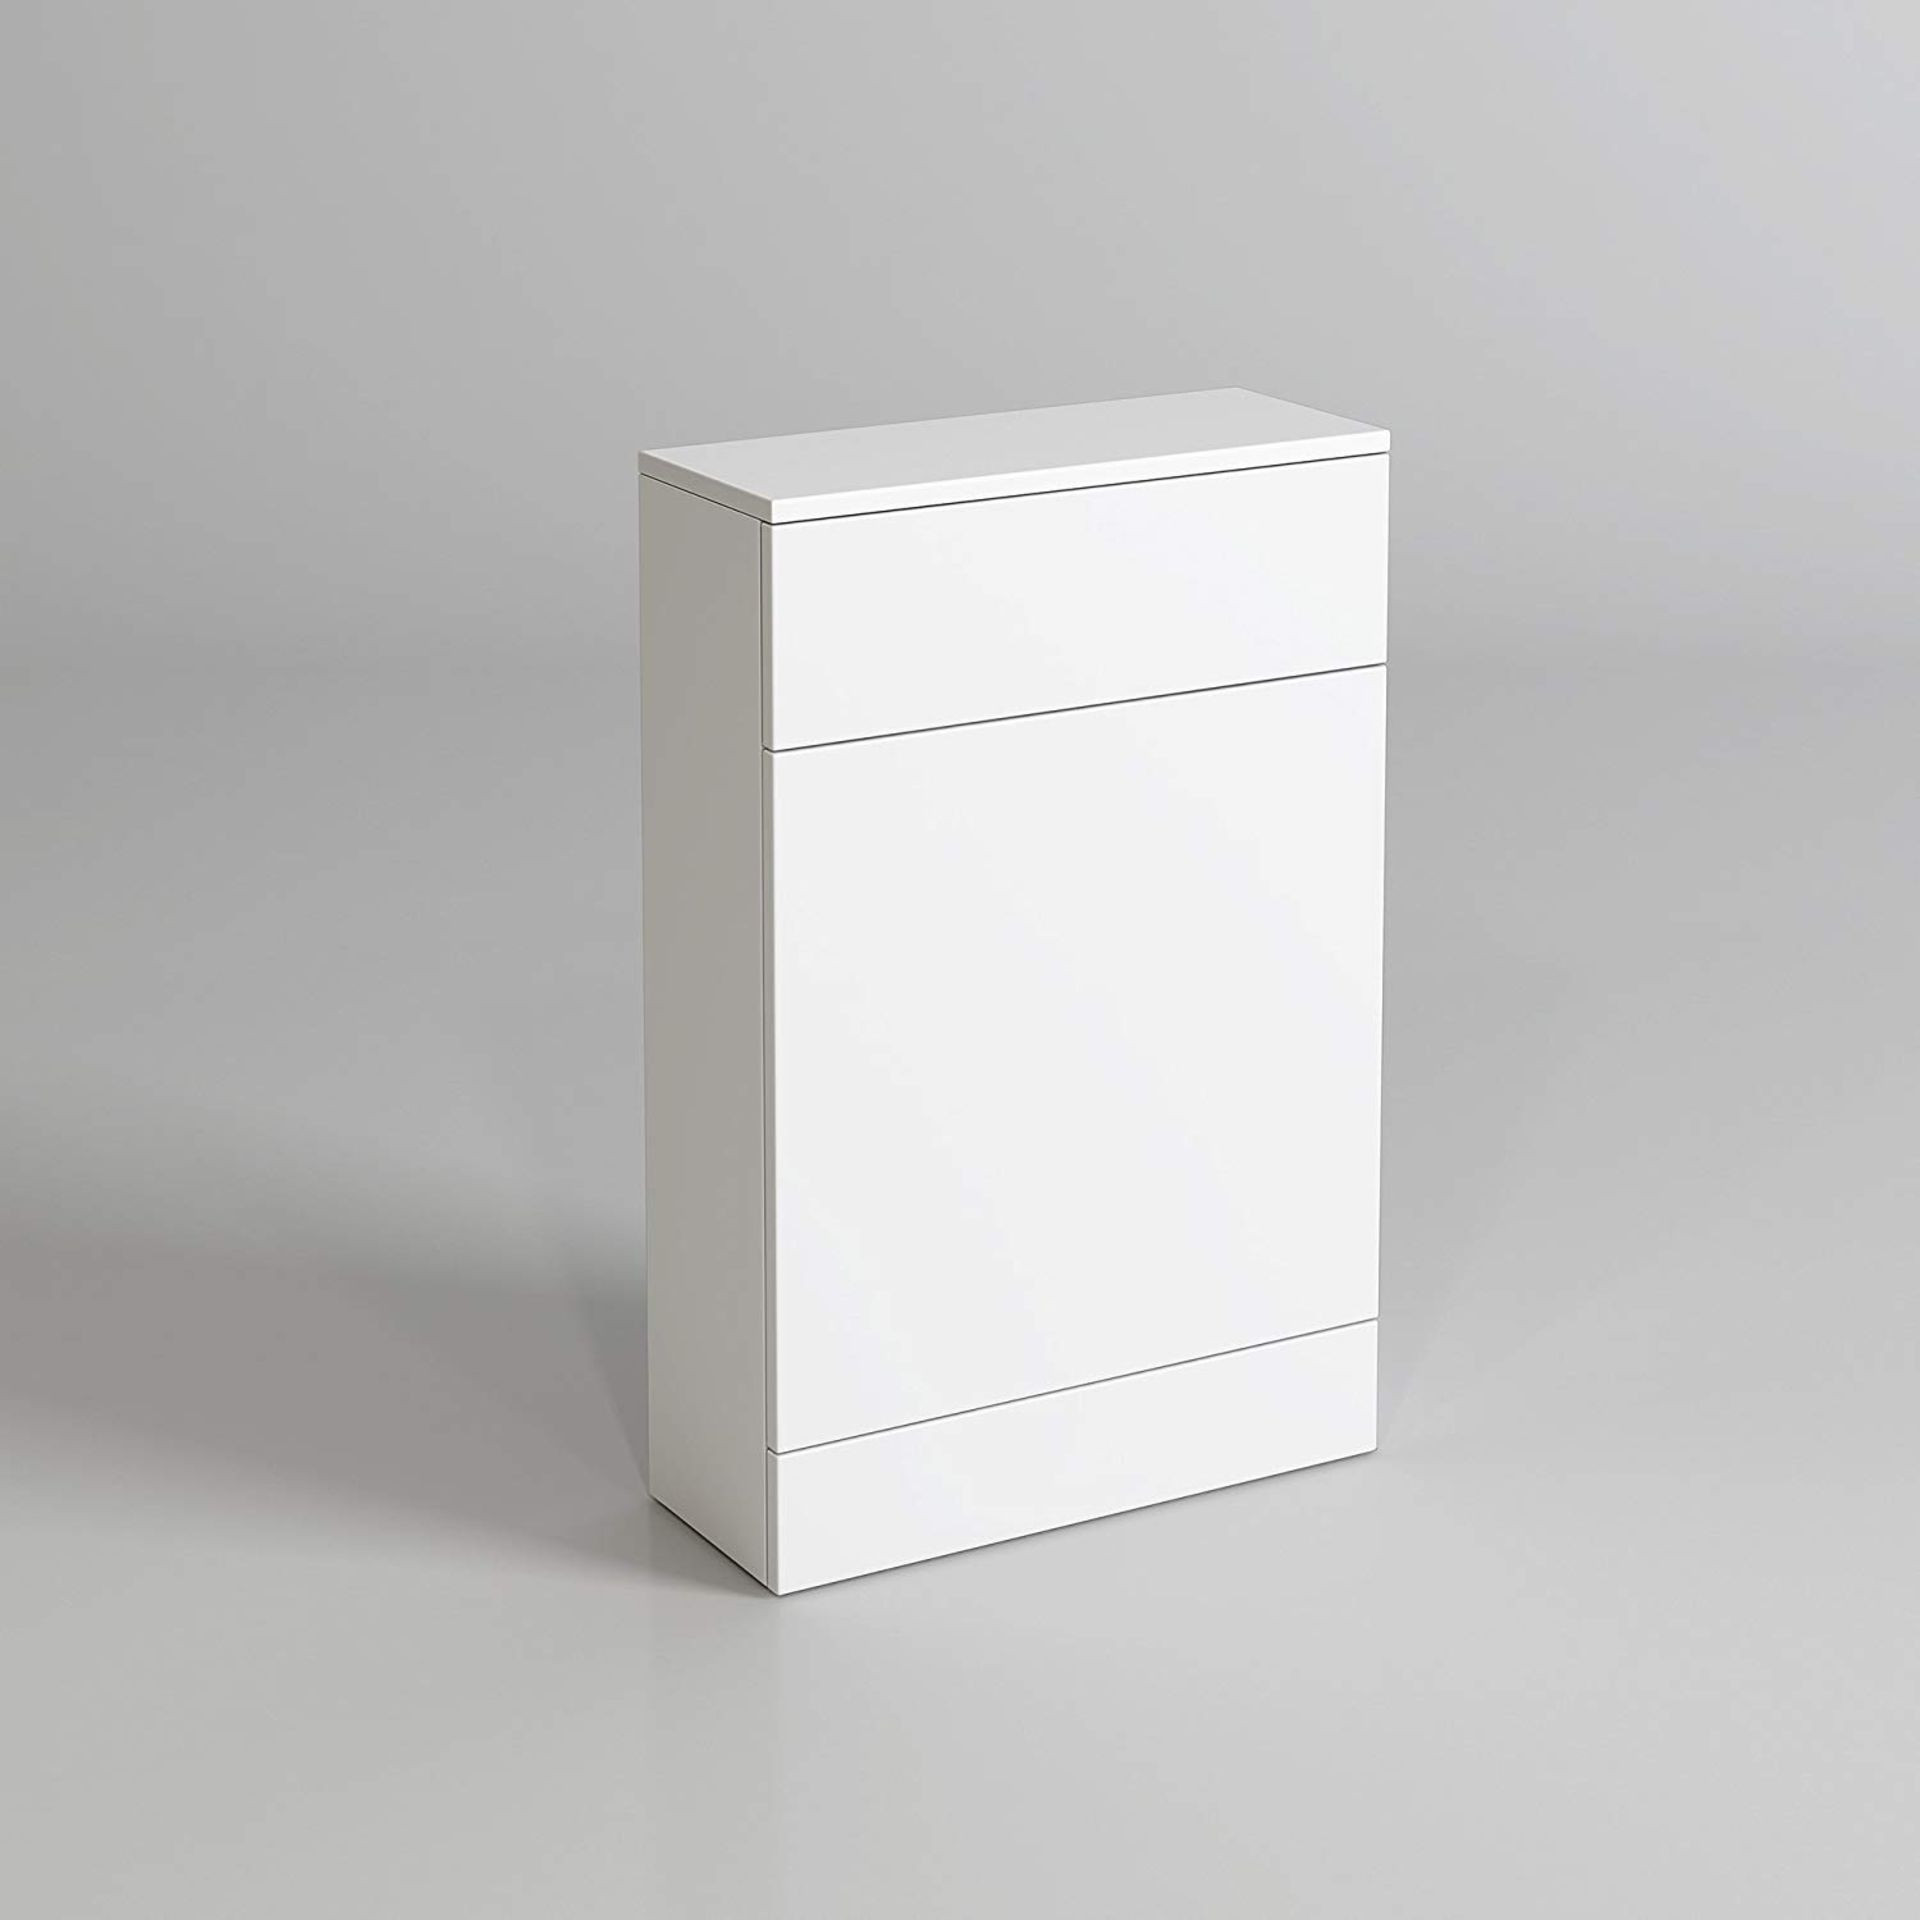 500x200 mm Concealed Cistern WC Unit Back To Wall Toilet Bathroom Furniture. MF703. Crafted fro...